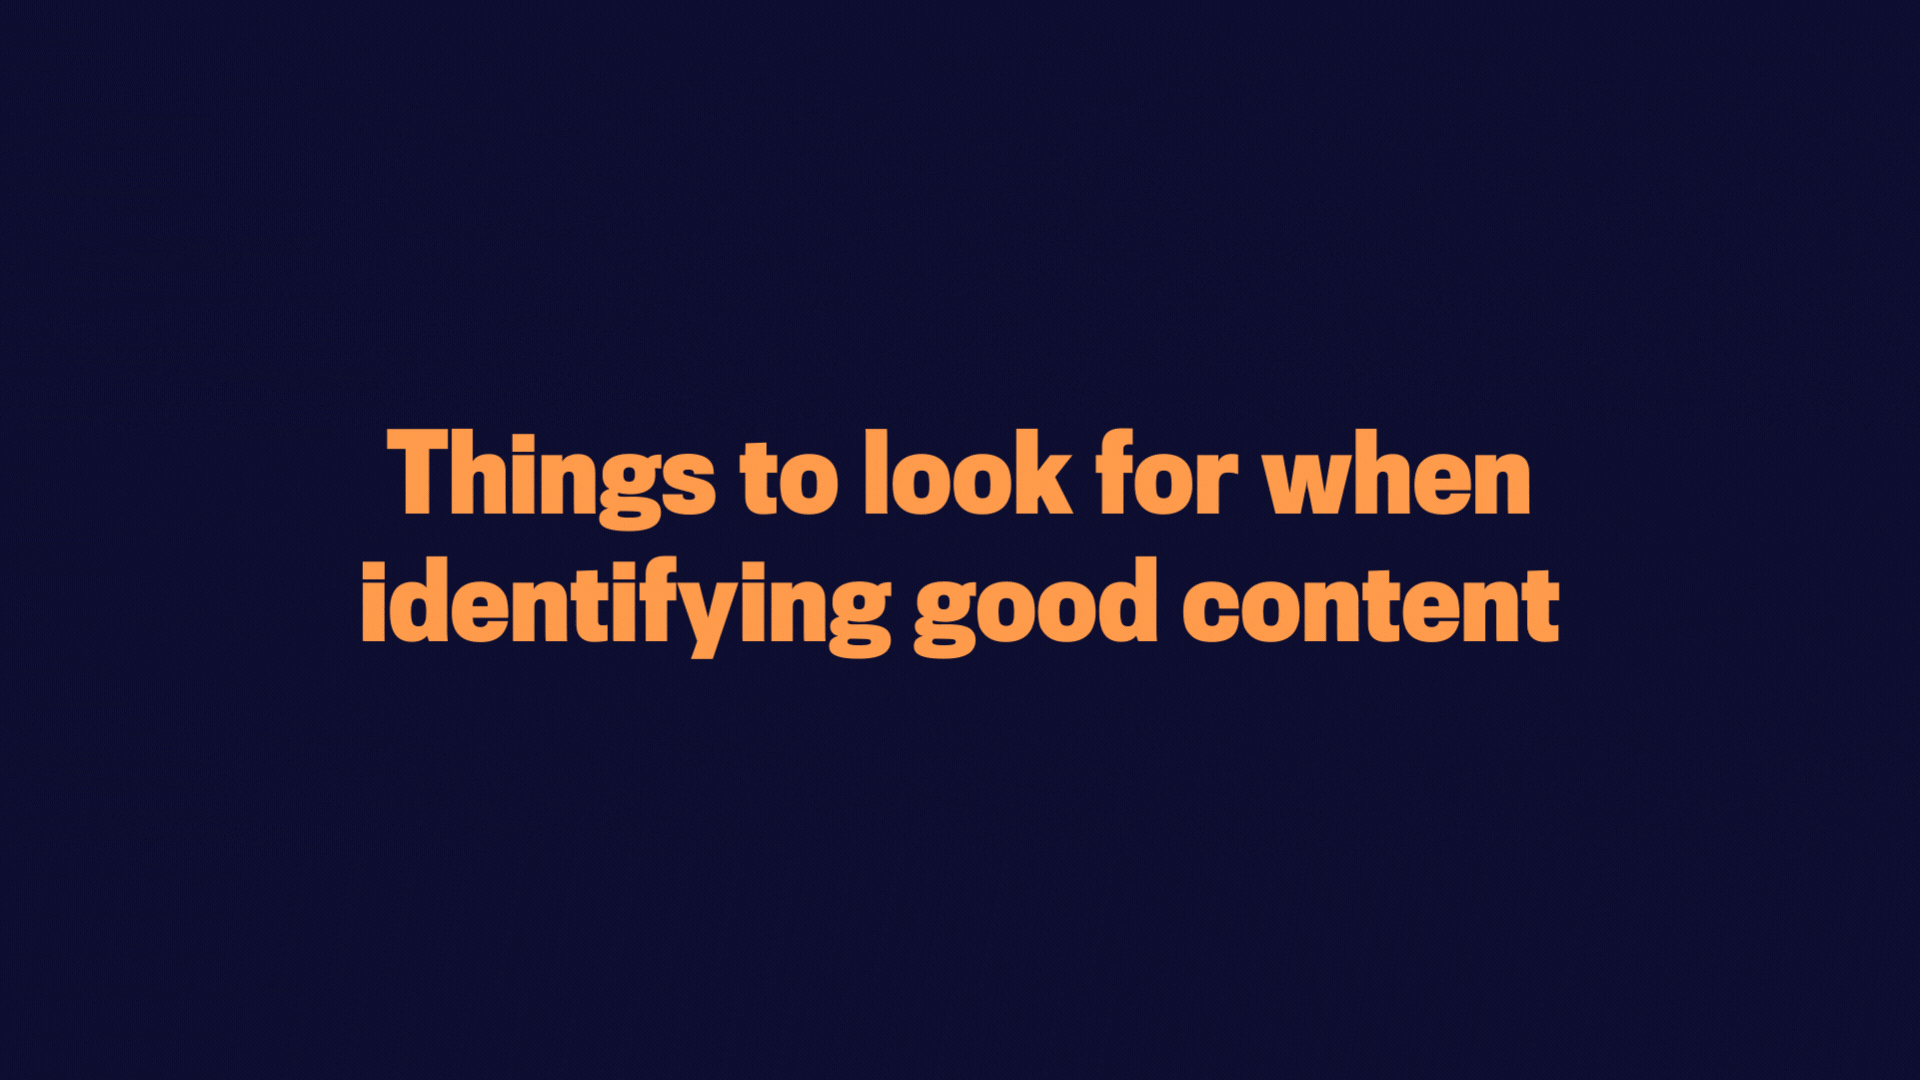 Good content has a lot of likes, comments, and/or sharees